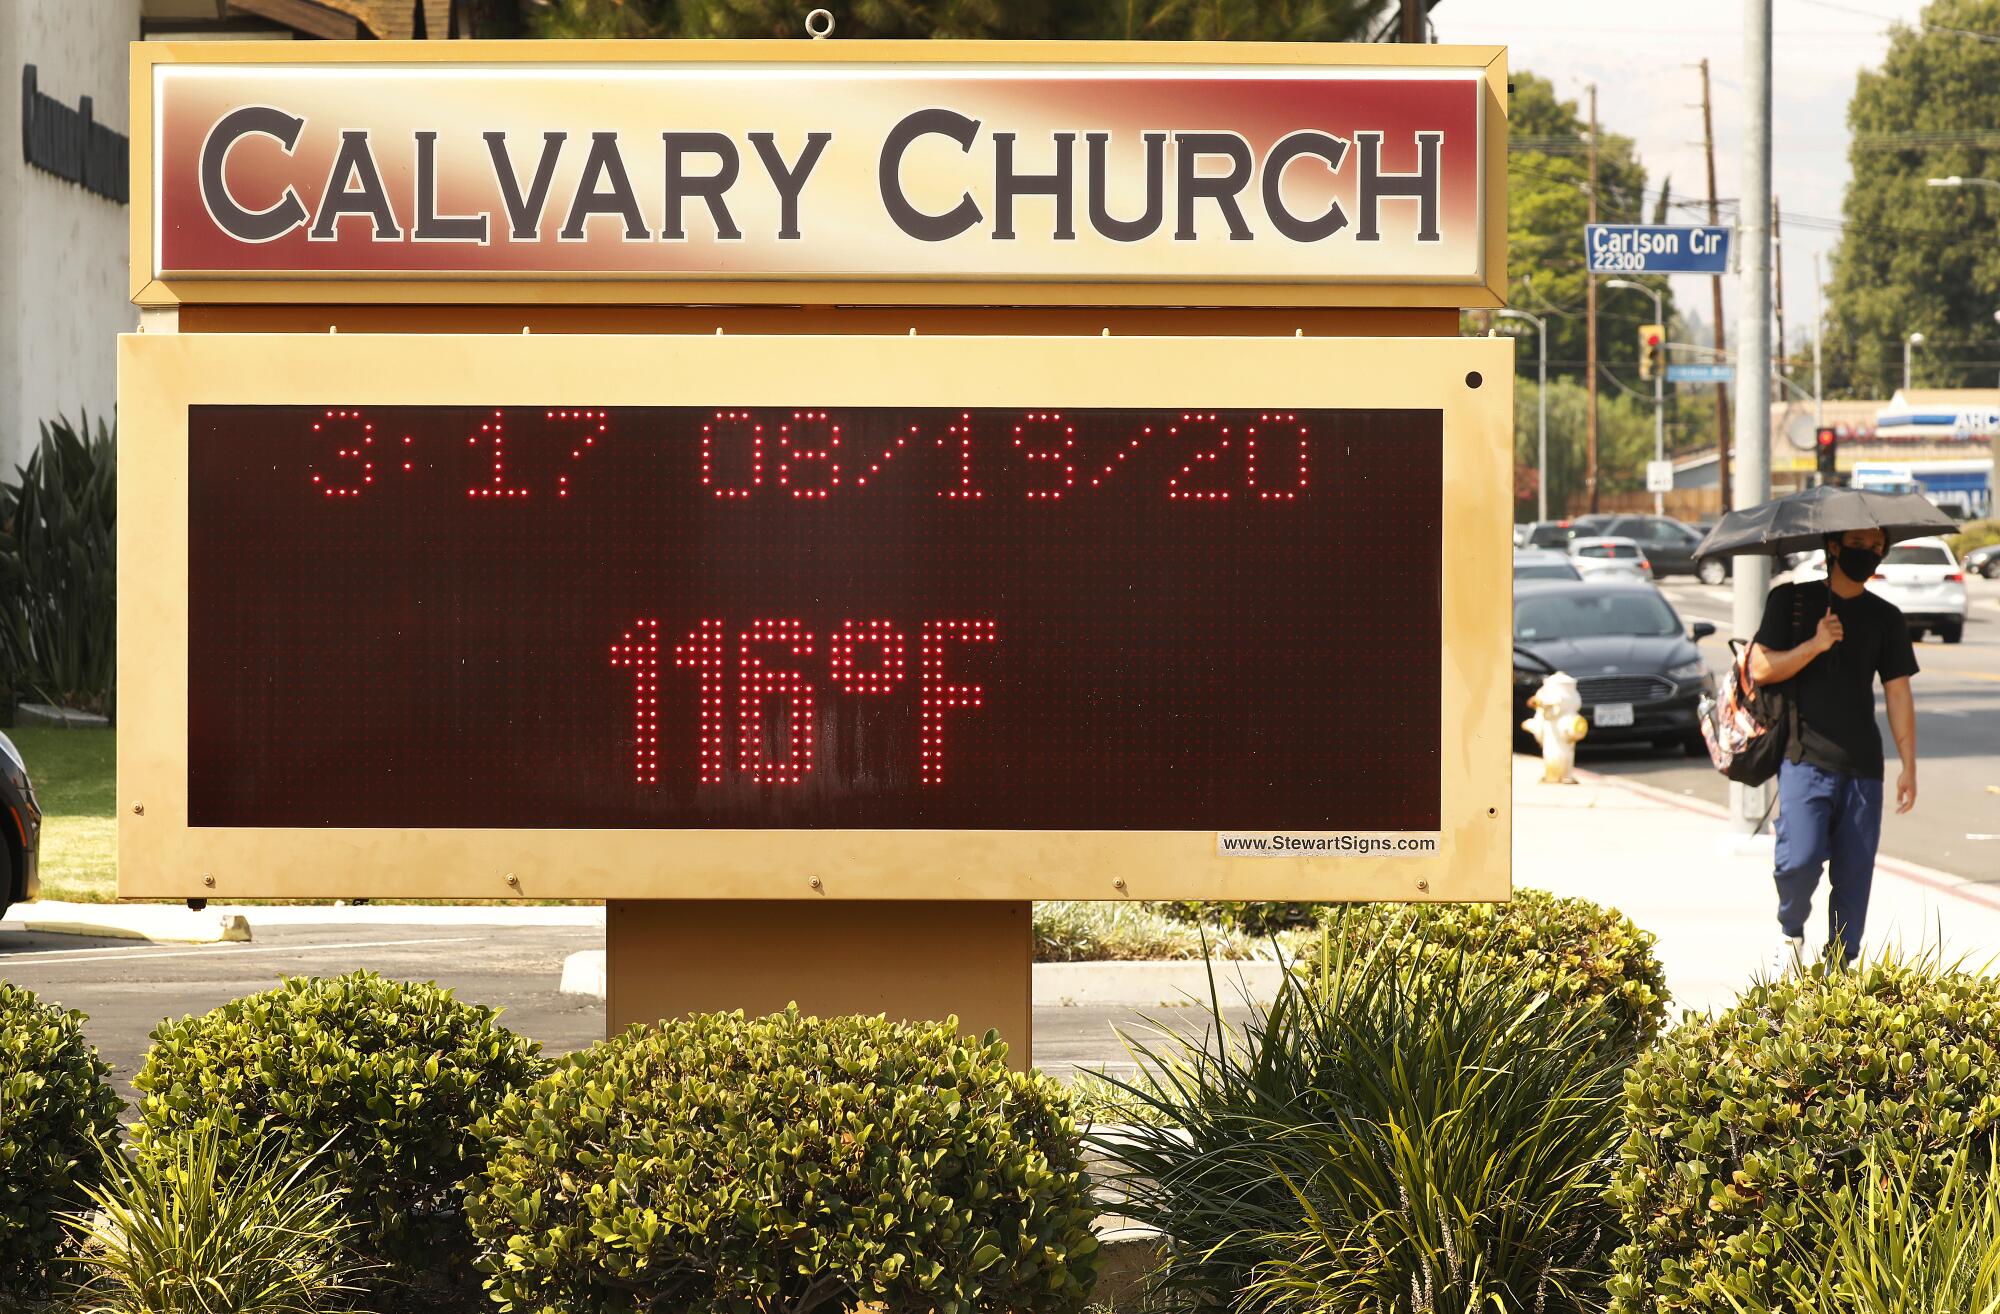 An August 202 photo shows the thermometer at Calvary Church in Woodland Hills hitting 116 degrees Fahrenheit.